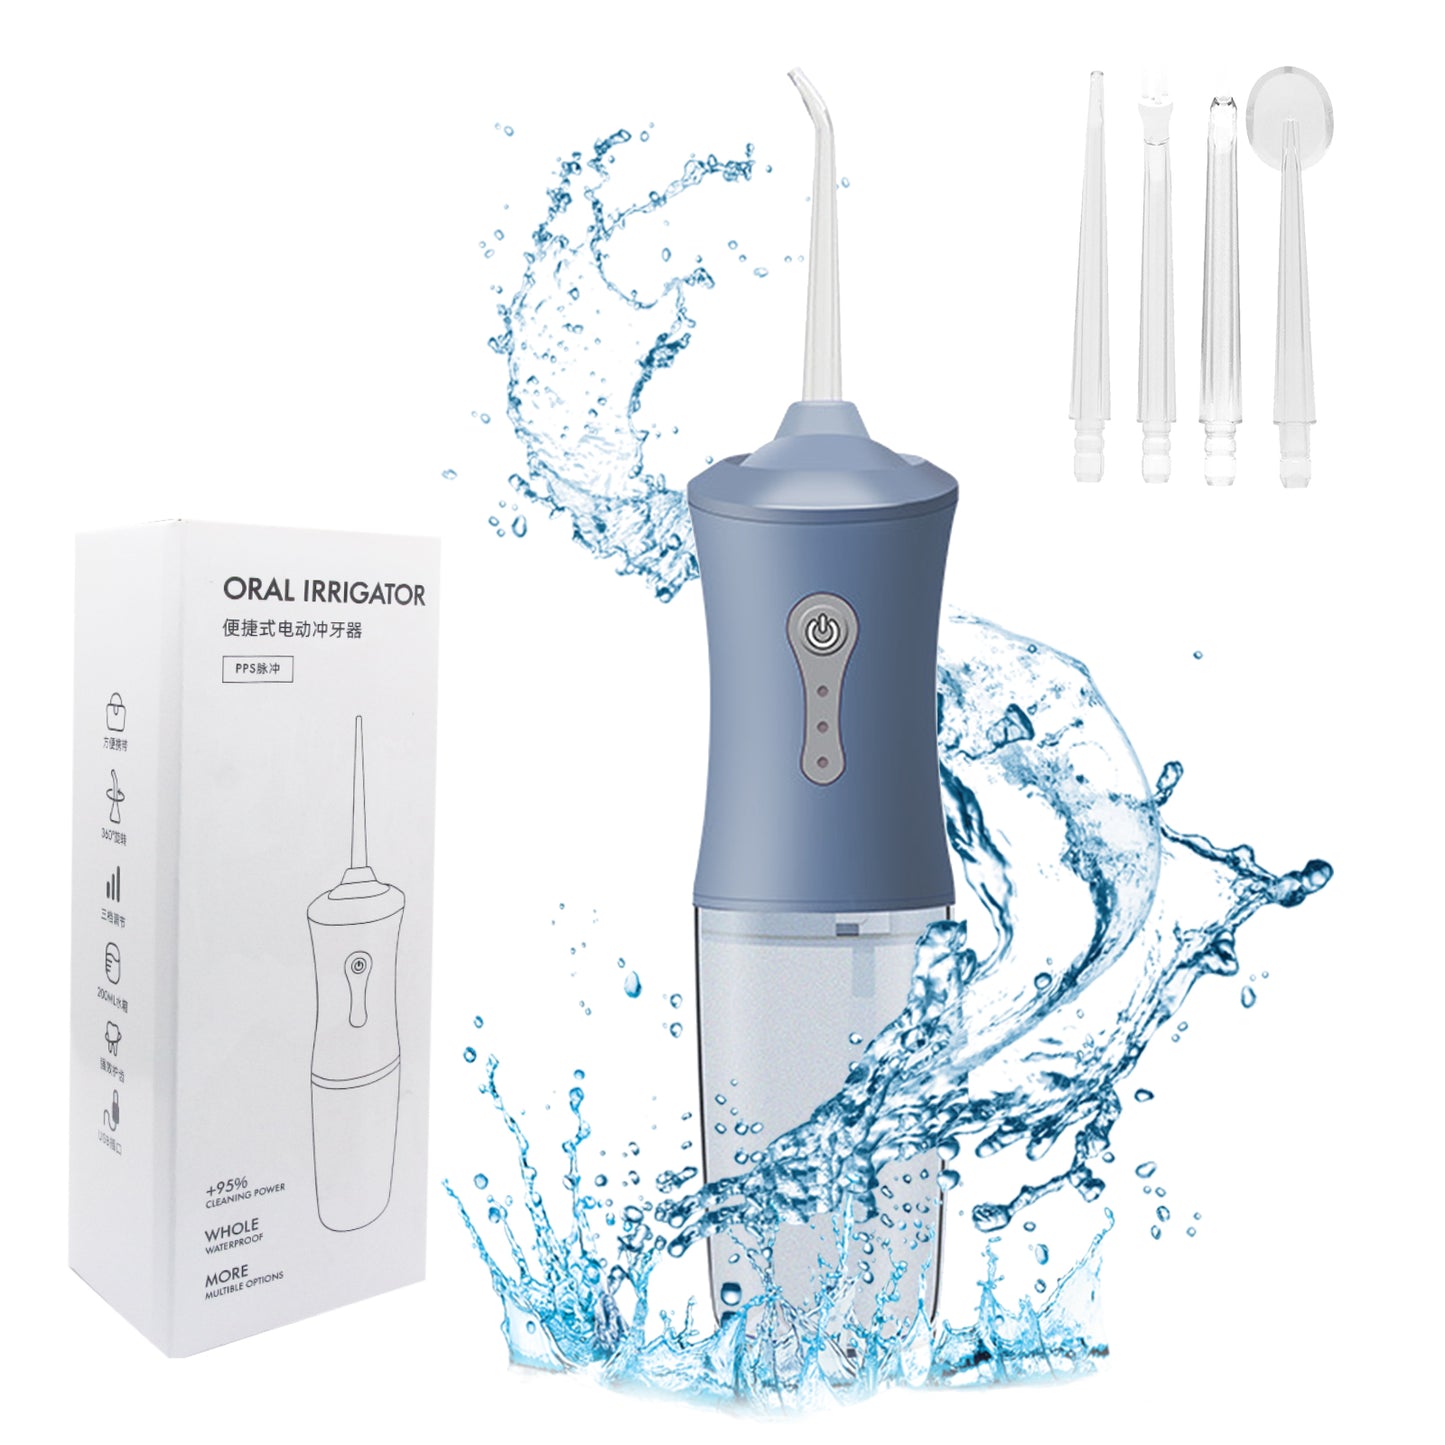 Genkent Cordless Portable Water Flosser Dental Teeth Cleaner, Professional Rechargeabl Oral Irrigator with 4 Jets and 300ML Tank, Blue